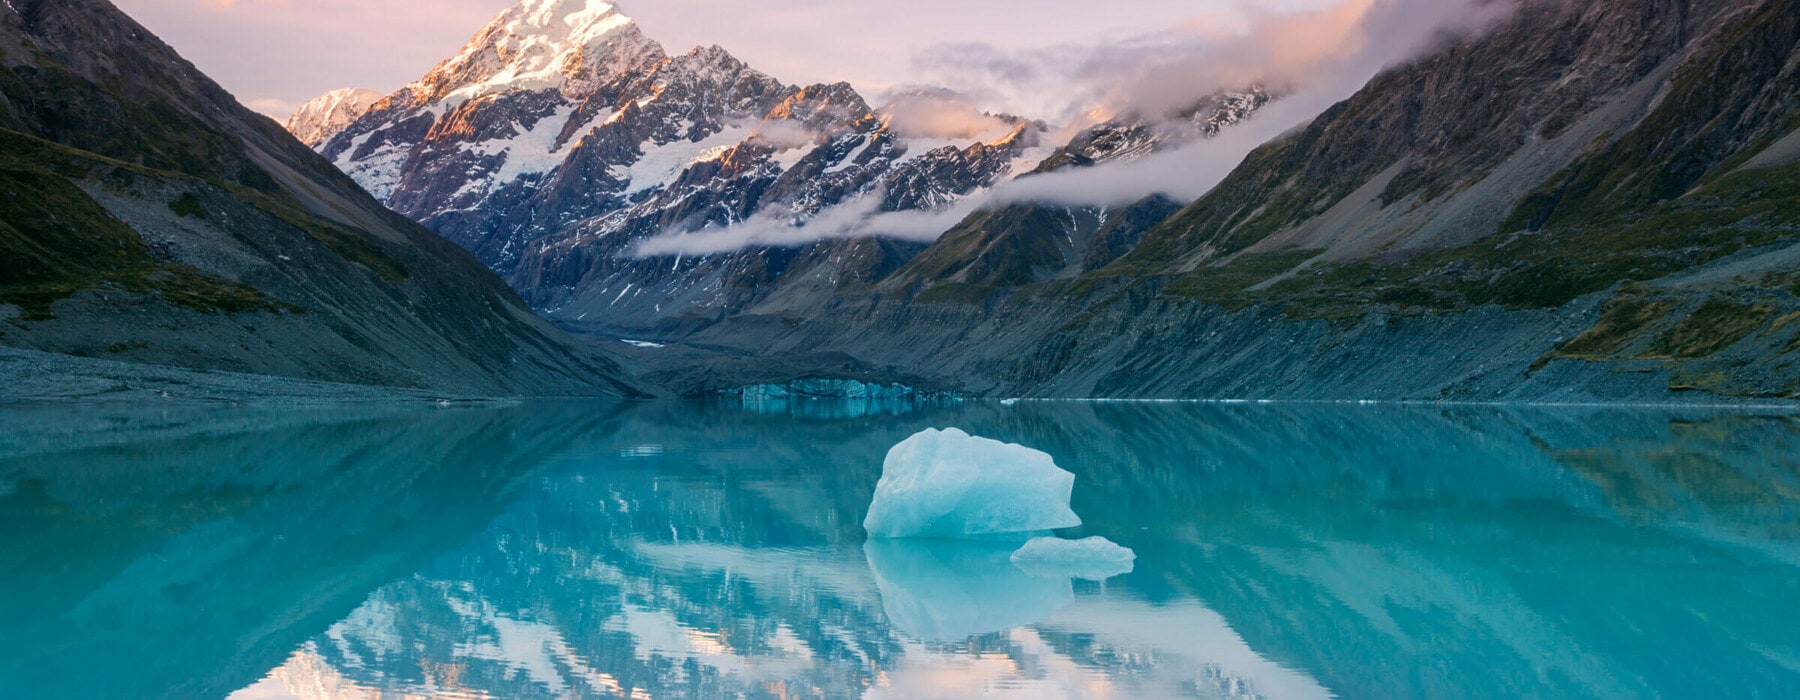 Snowcapped peak of mount Cook reflecting in still lake with iceberg at sunset, Aoraki mount Cook National park, Canterbury region, South Island, New Zealand.